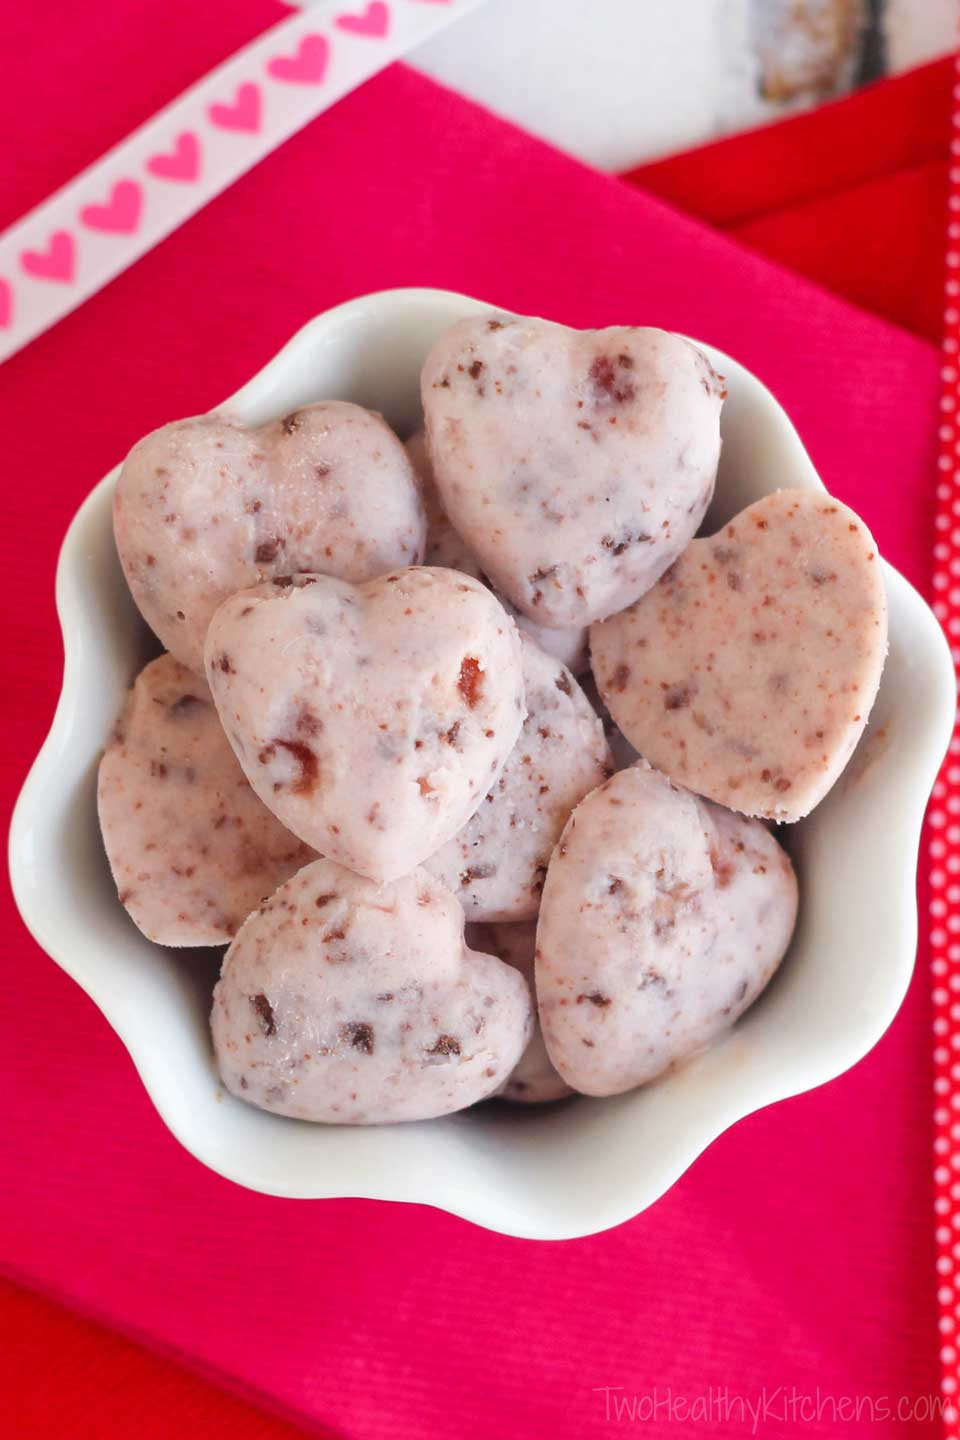 Healthy Valentines Snacks
 Easy Healthy Valentine s Day Treats and Snacks Two